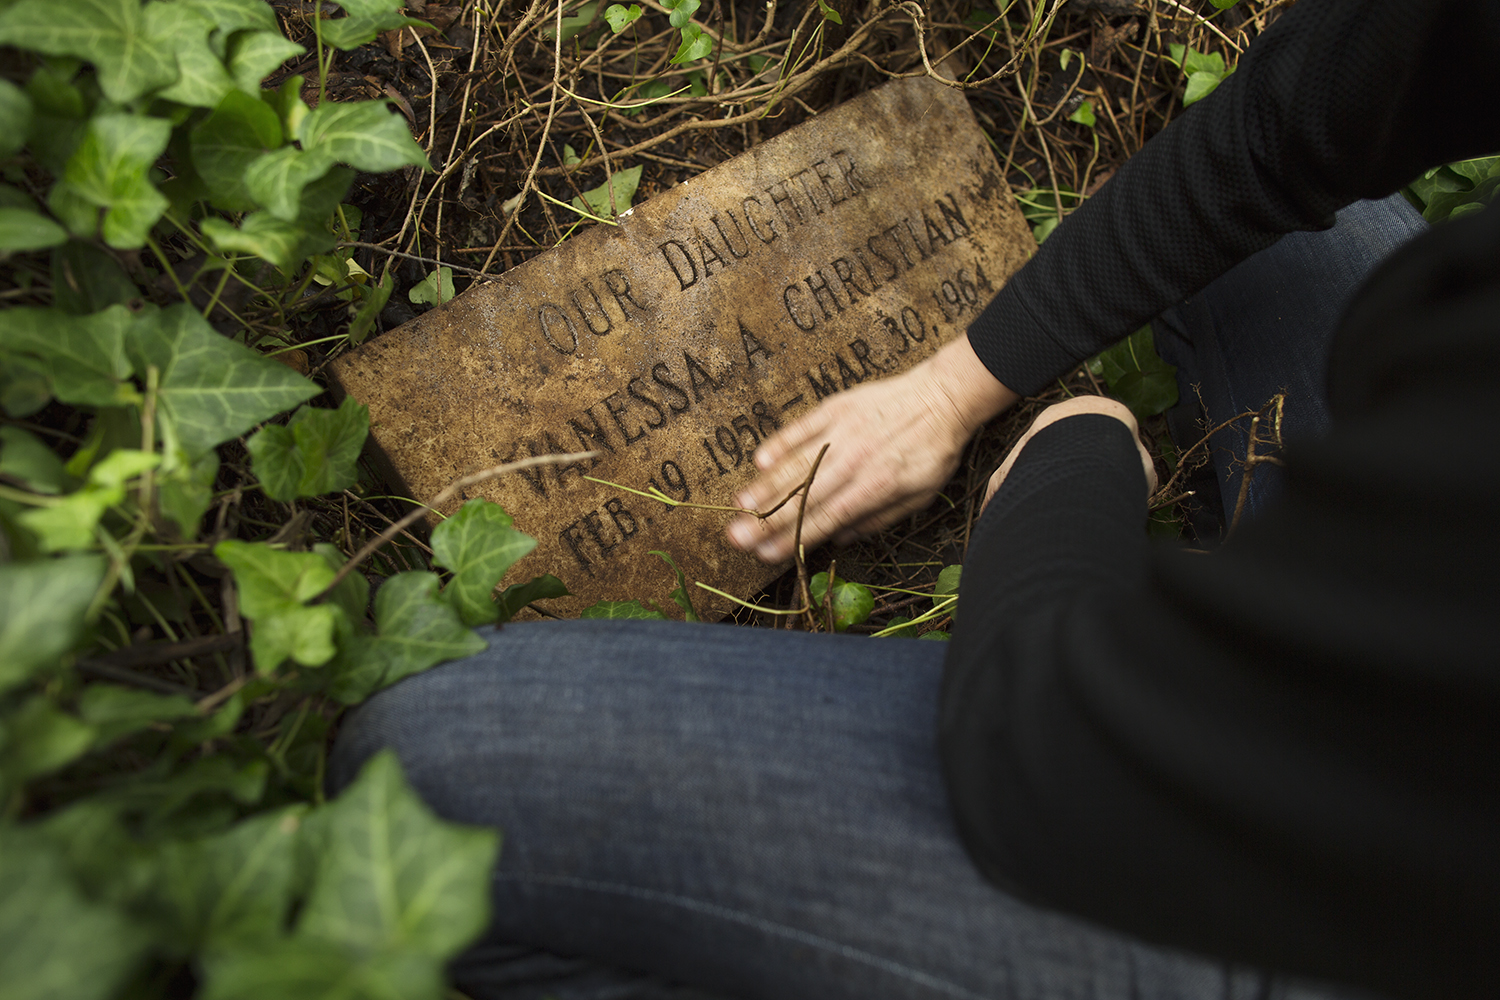  Erin wipes dirt from Vanessa Christian grave marker.&nbsp;East End Cemetery, Henrico County, Virginia, October 2015. Photo: ©BP 